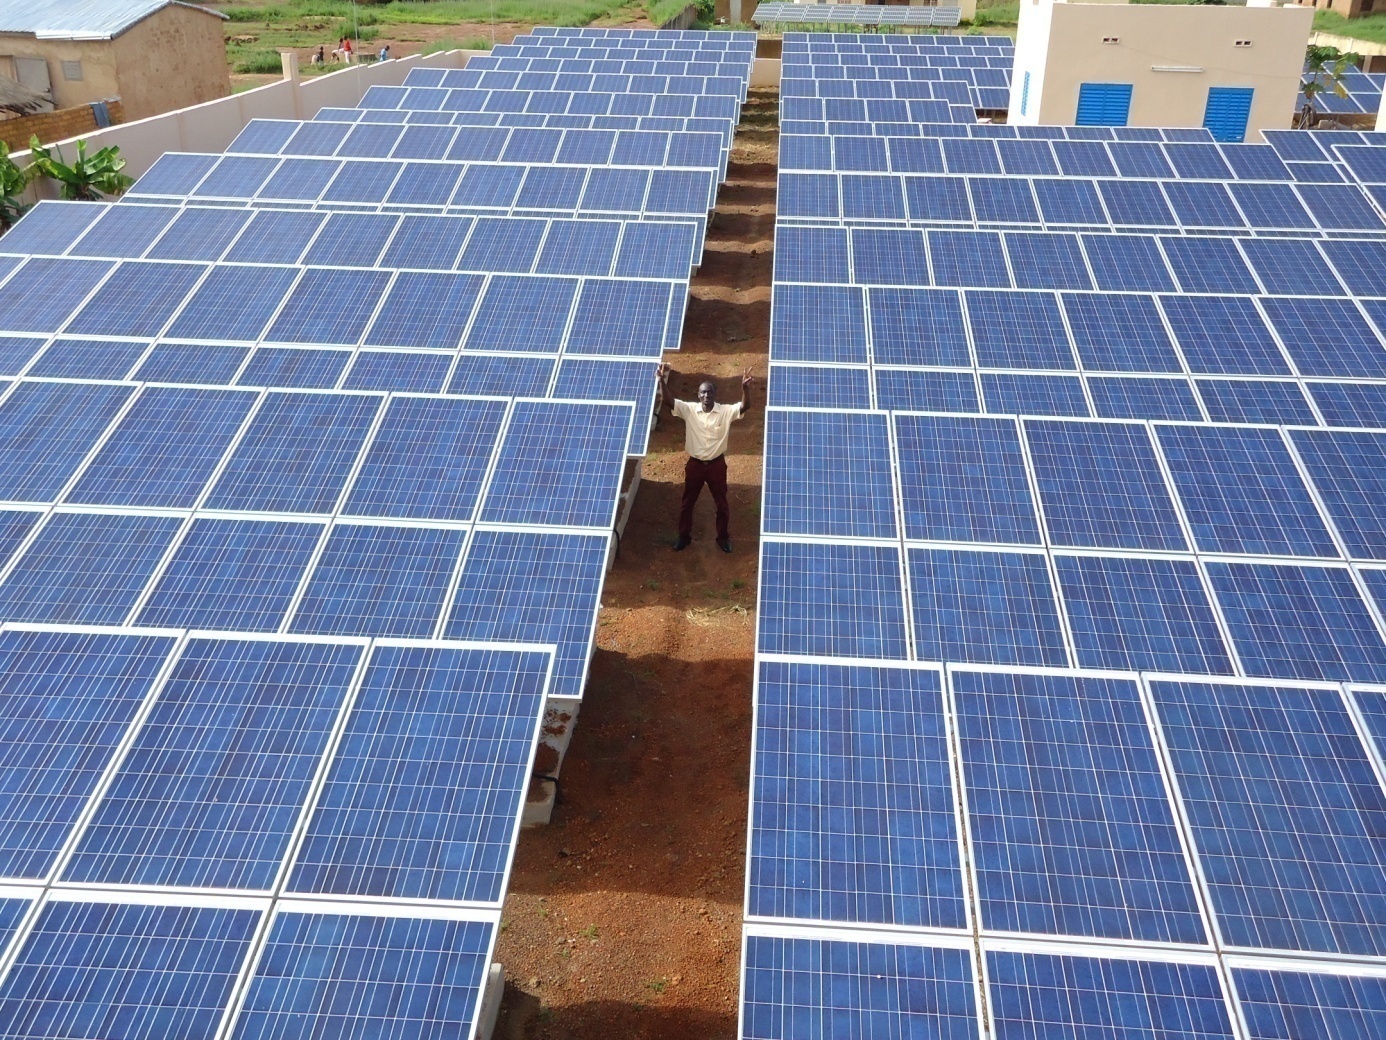 100% RENEWABLE ENERGY FOR TANZANIA-Access to renewable energy for all within one generation